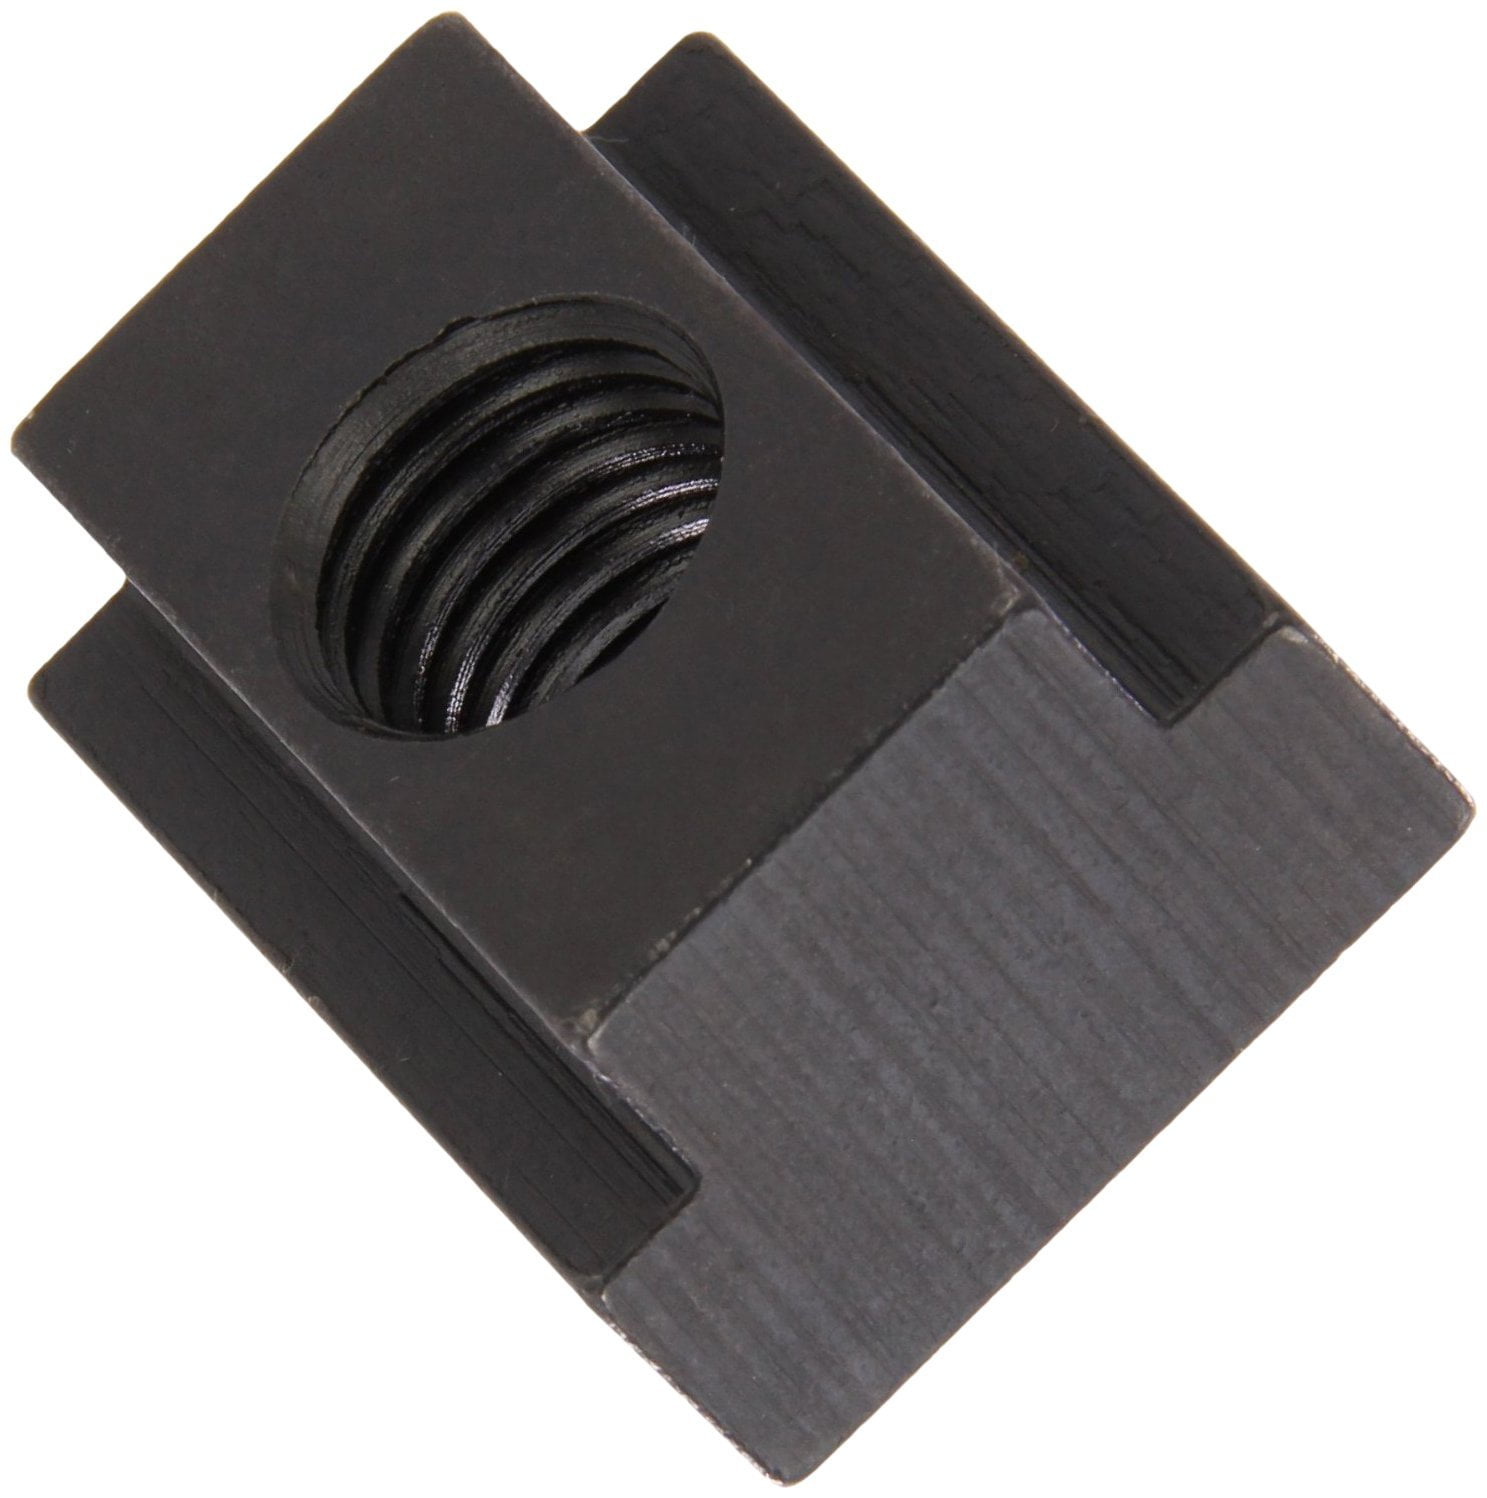 1018 Steel T-Slot Nut Made in US Pack of 5 Black Oxide Finish 5/8-11 Threads 3/4 Height 3/4 Slot Depth Grade 4 5/8-11 Threads 3/4 Height 3/4 Slot Depth Te-Co 41416